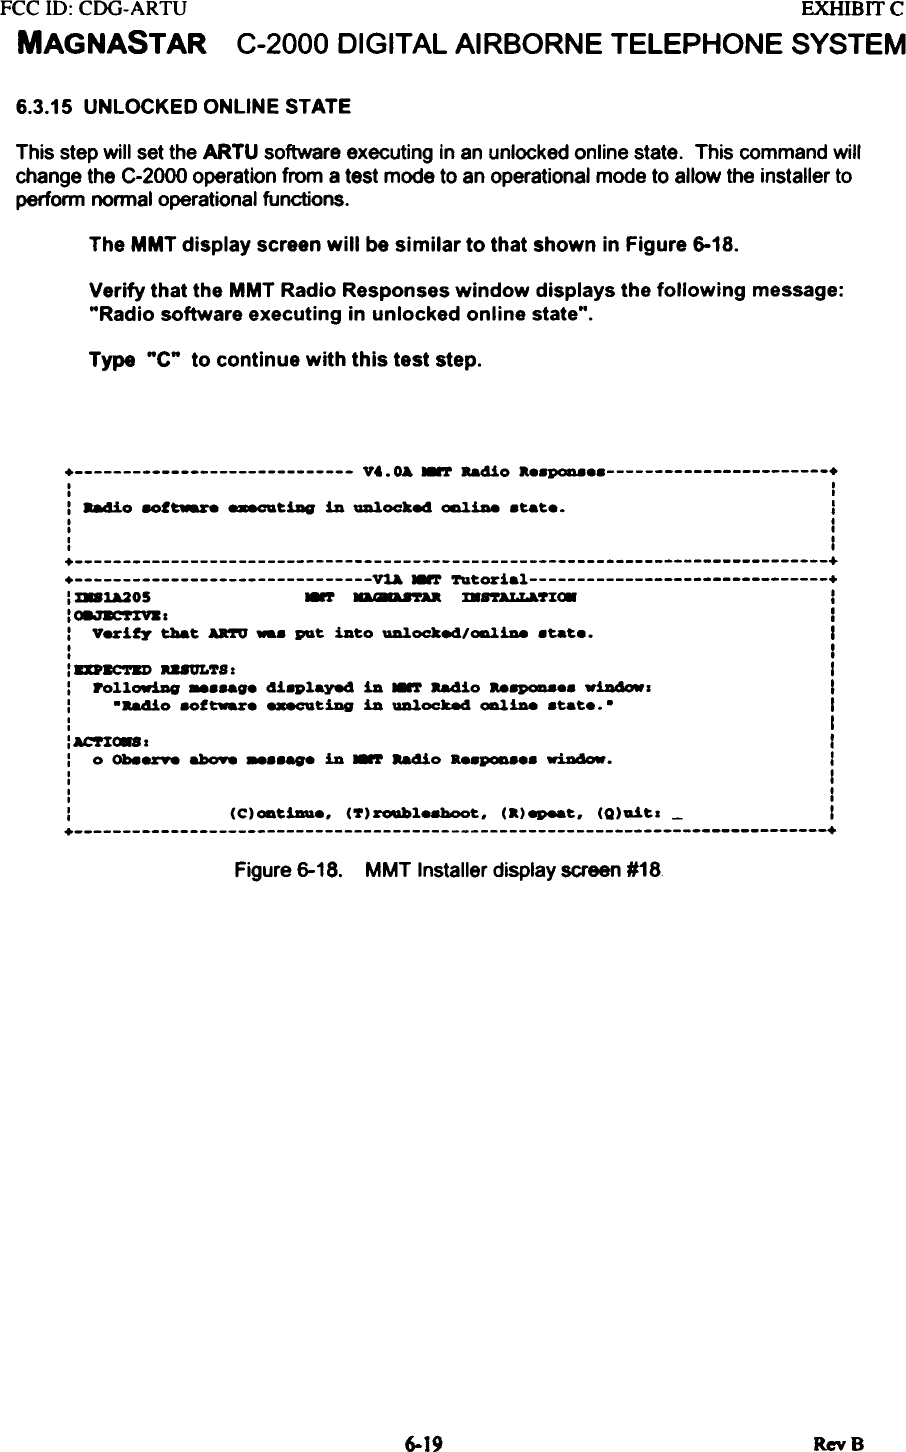 FCC ill:  CDG-ARTUMAGNASTAREXHIBITCC-2000 DIGITAL AIRBORNE  TELEPHONE  SYSTEM6.3.15  UNLOCKED ONLINE STATEThis  step will  set the ARTU  software  executing  in an unlocked  online  state.  This  command  willchange  the C-2000  operation  from  a test  mode  to an operational  mode  to allow  the  installer  toperform  normal  operational  functions.The MMT display  screen will  be similar  to that shown  in Figure 6-18.Verify that the MMT Radio Responses window  displays the following  message:&quot;Radio  software  executing  in unlocked  online  state&quot;.Type  &quot;C&quot;  to continue  with this test  step.+  V..~  ~  Ra410 a..~  +I  II  II  884io  8Of~  _tillg  in  ~oc:ke4  ~1De  .tat..  II  II  II  I+  ++  Vl&amp;  ~  Tutorial  +:  %81&amp;205  ~  a8U&apos;rAa  mrrALLa.UC8  II~~-T%Y.I  I:  Verity  t:!Iat  AR&apos;fV  -.  Pl&amp;t  into  ~oc:ke4/~1De  .tat..  II  II  I:  8D8C&apos;1&apos;81)  U8ULTS:  I:  PolloriAg  _..ag.  4i8Played  in  ~  Radio  Ra8P0D8..  Willdowl  I:  -Ra4io  8Of~.  _tiDg  in  ~0cke4  ~1De  .tat..  -  I:  I: ACT%C88 I  I:  0  ON8rY8  abo98 -..age  in  ~  Ra4io  a..~..  ~.  I:  I:  I:  (C)oatiDu.,  (7)roubl.8boot,  (a)epeat,  (Q)ait.  -  I+  +Figure 6-18. MMT Installer display screen #18.RevB6-19